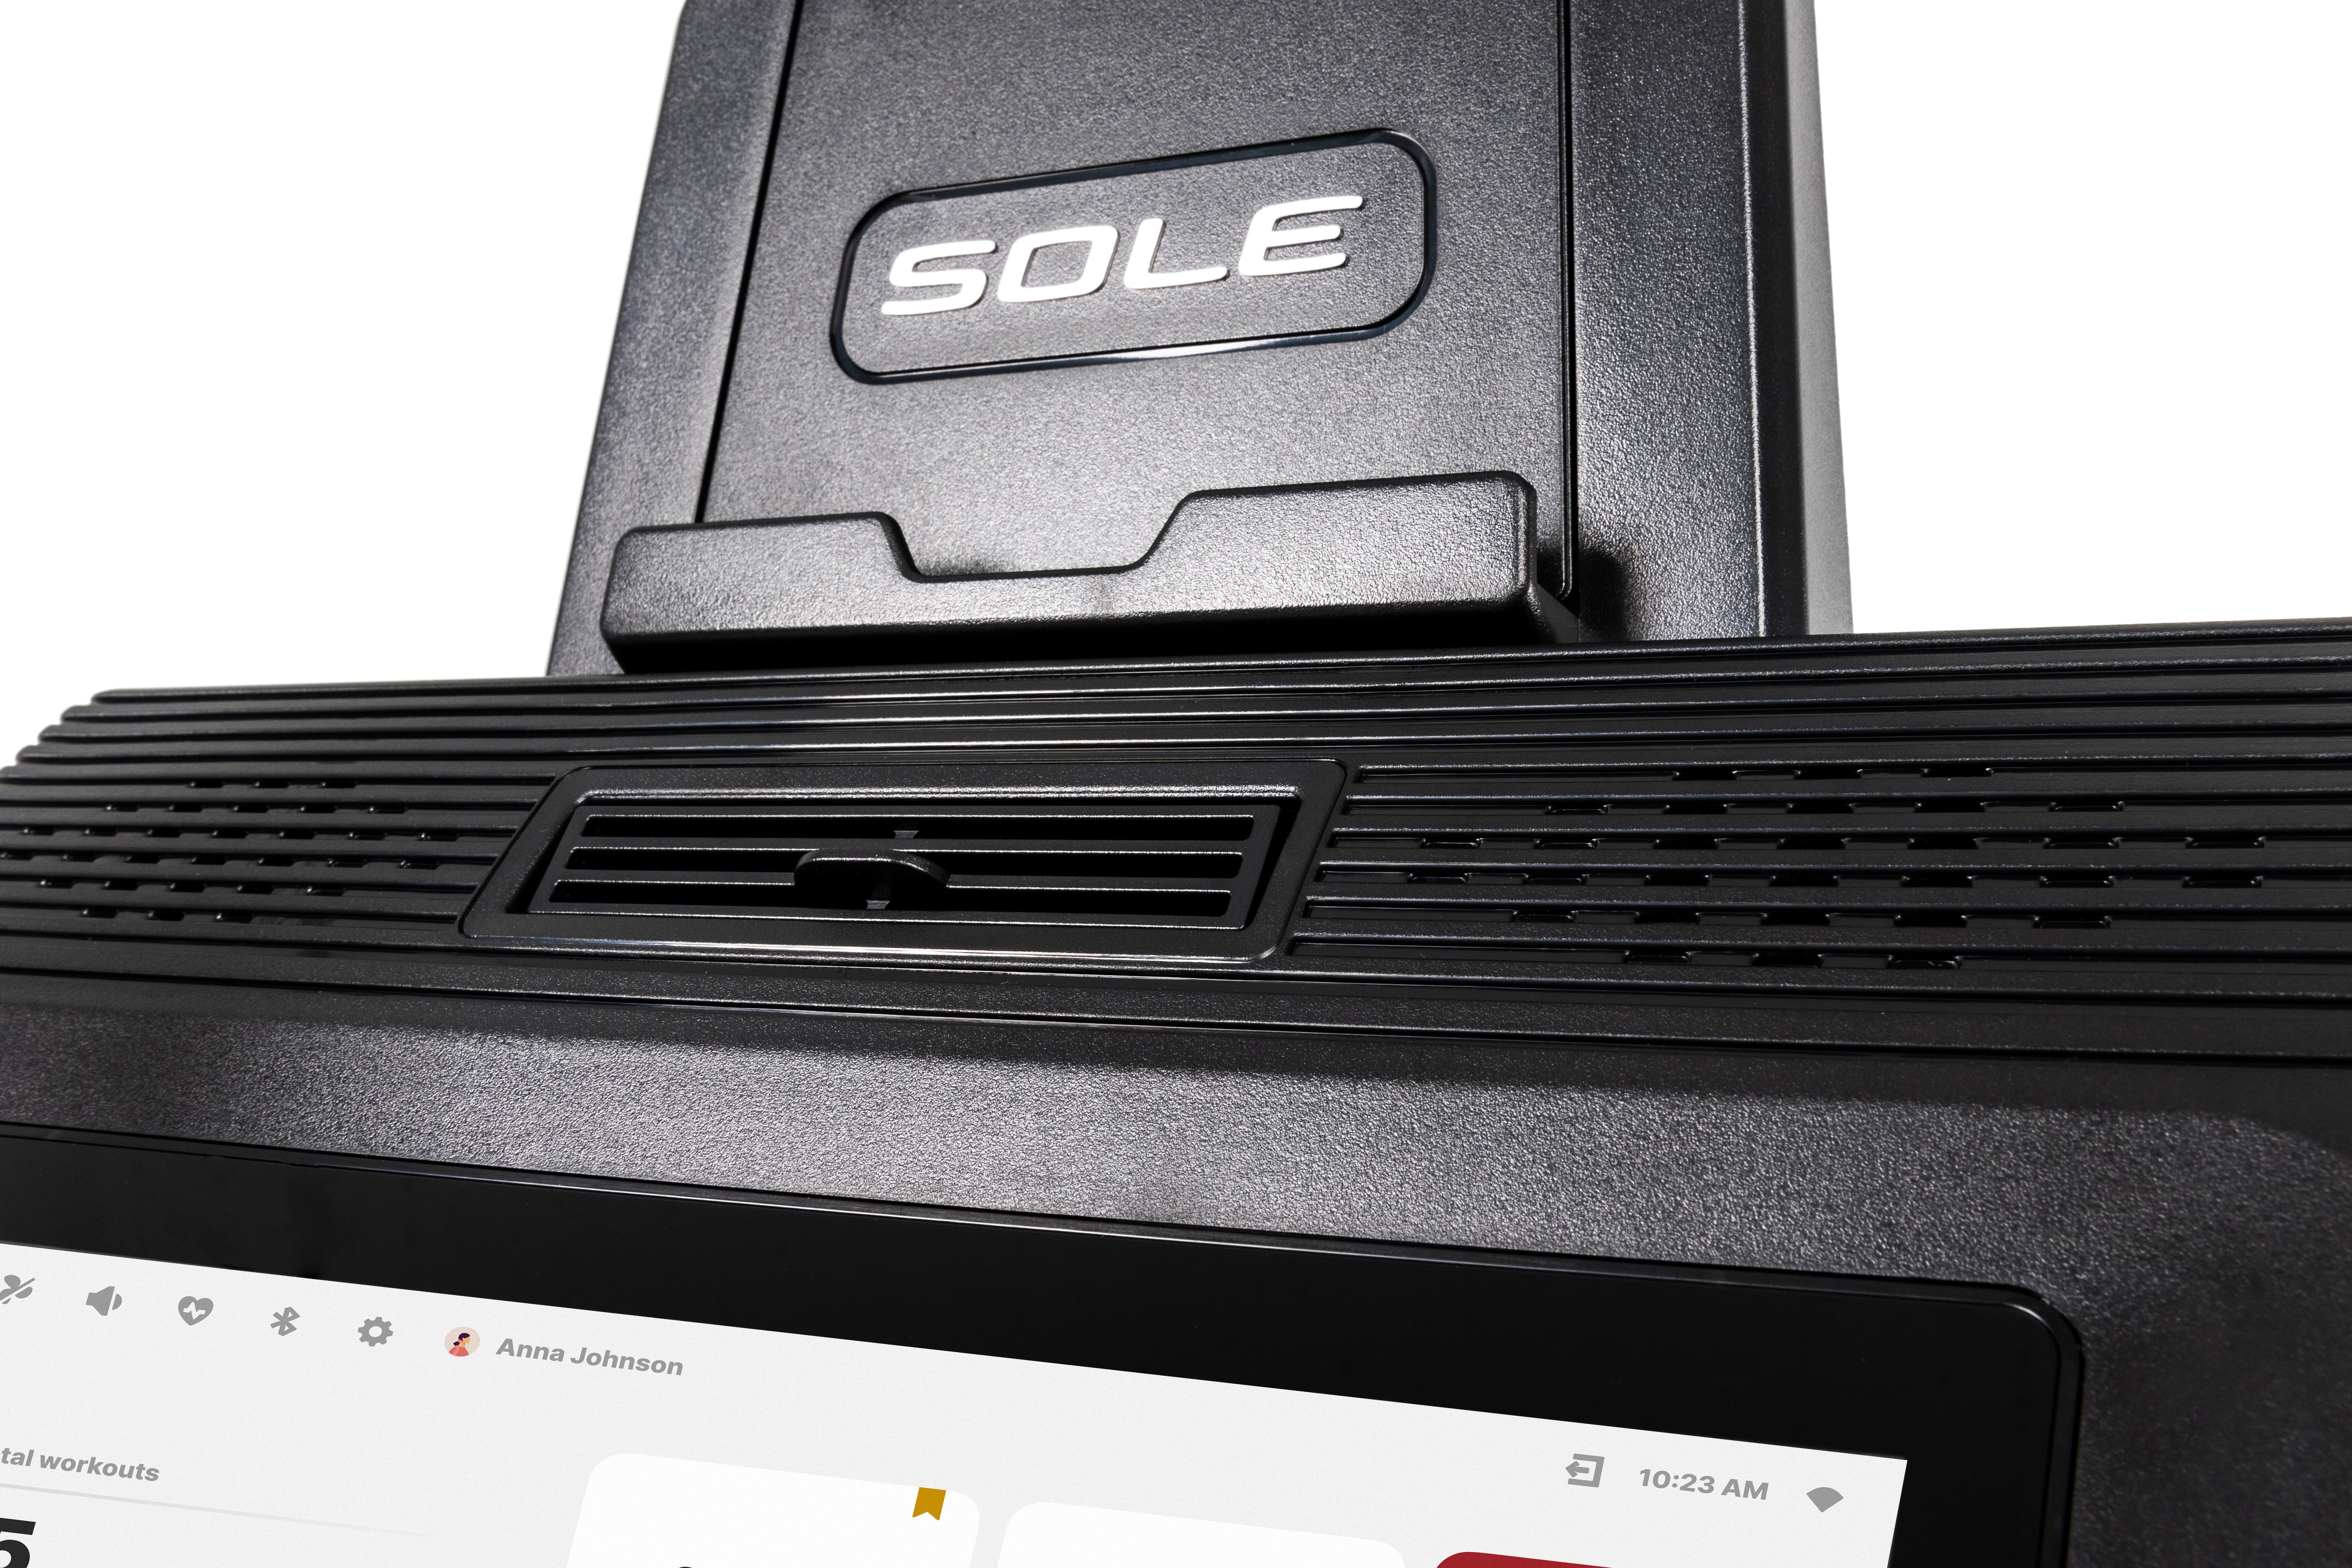 Close-up view of the Sole E95S elliptical machine's base, featuring the embossed "SOLE" logo, textured design, and a portion of the digital display with a user profile named "Anna Johnson" visible at the bottom.